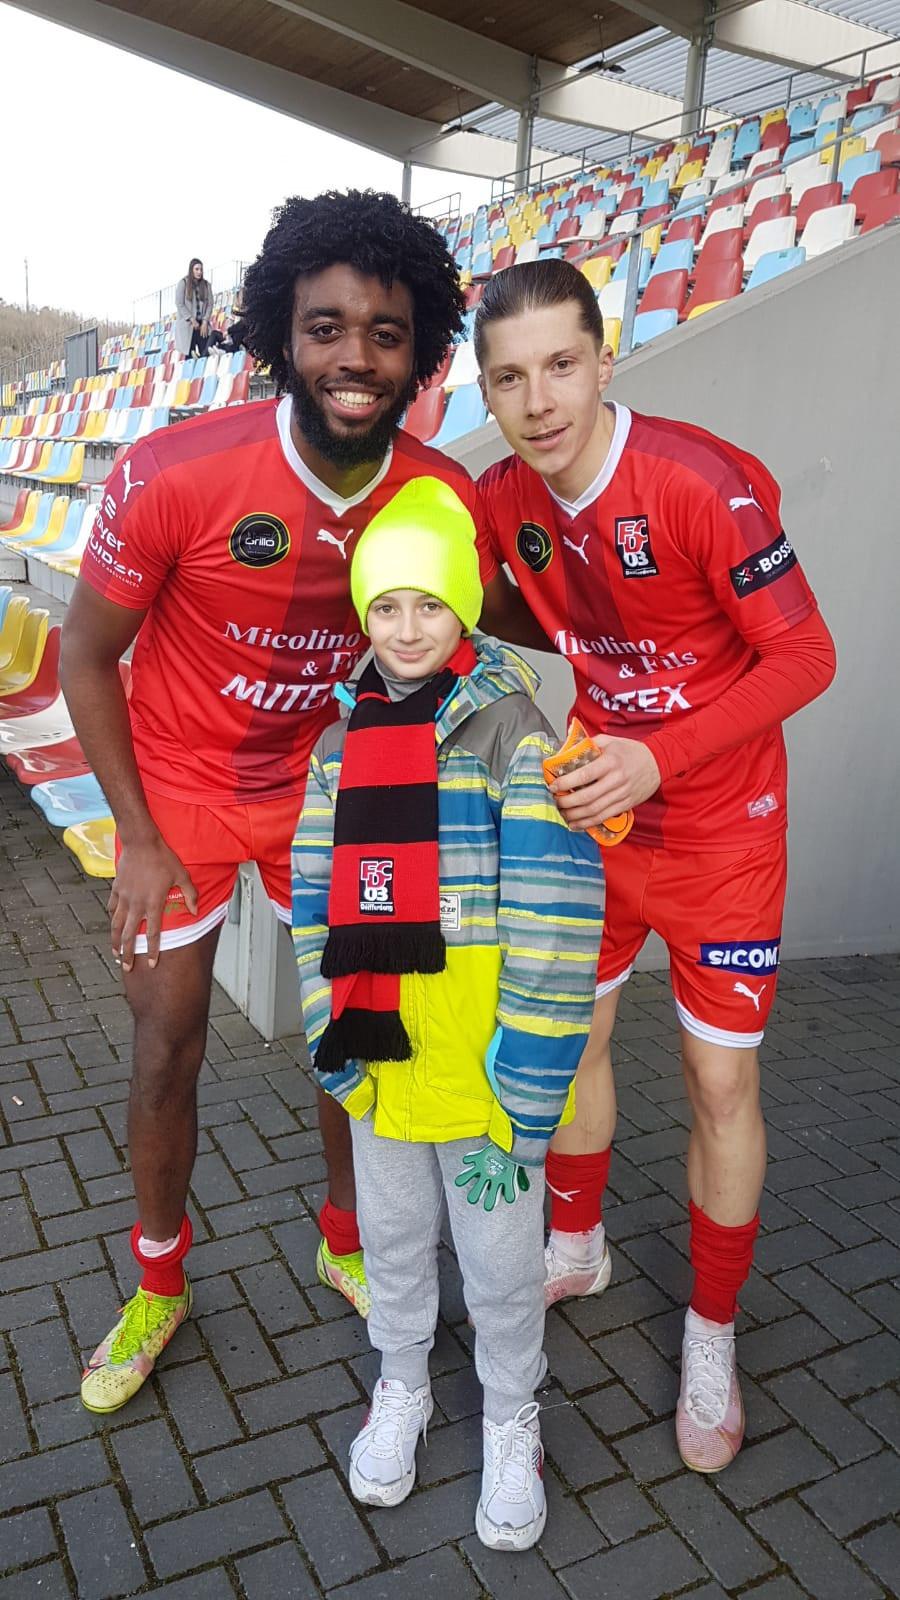 9-year-old Luka pictured with Differdange club footballers during his visit to the stadium where he was welcomed by the team and president of the club.   Provided by Kozyrev